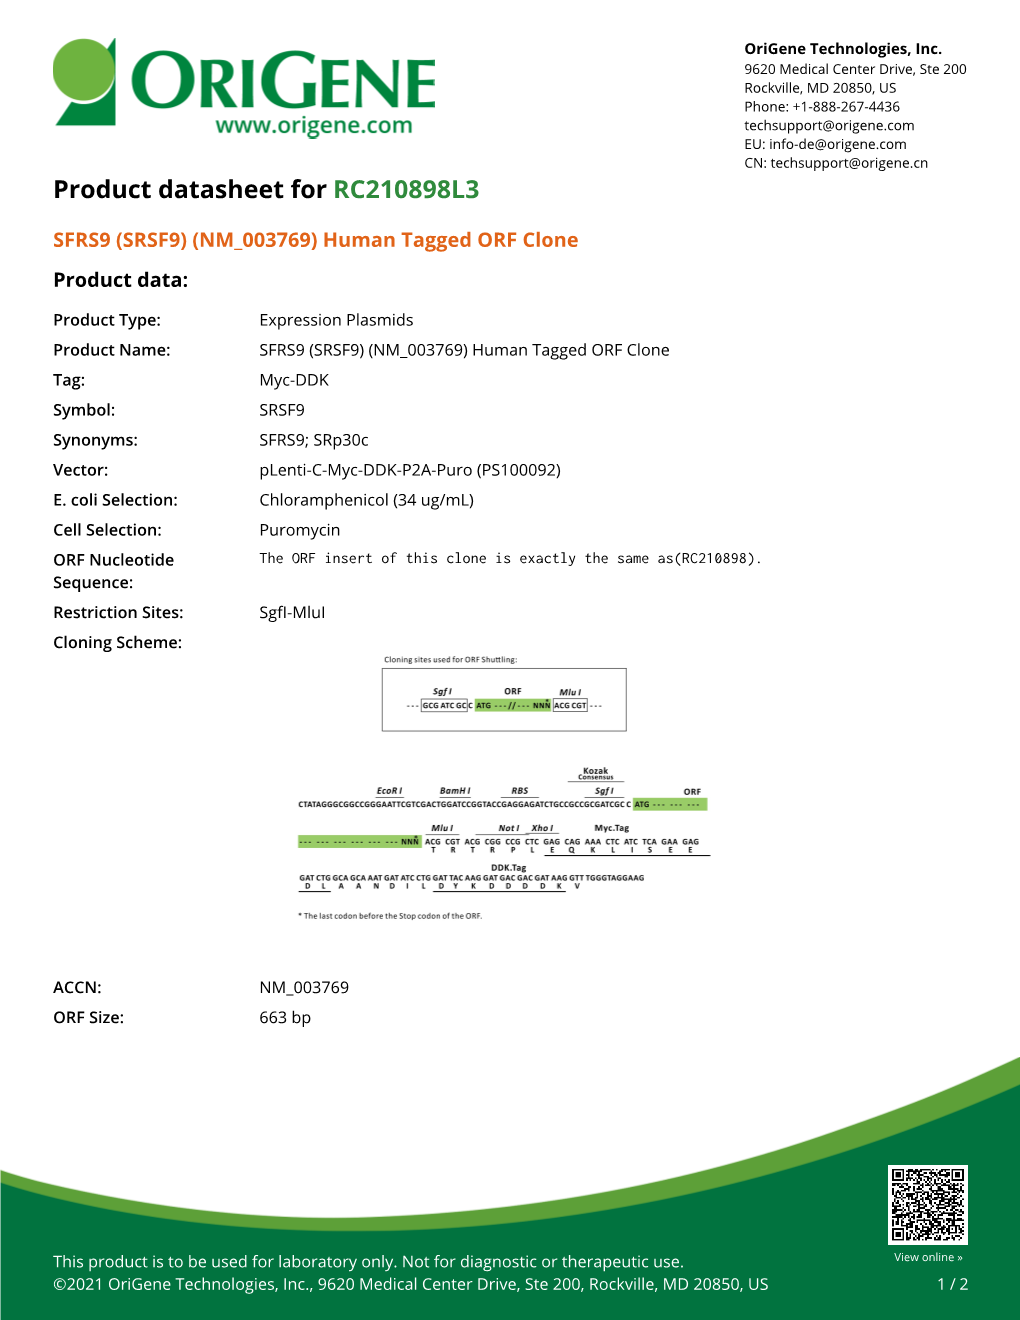 SFRS9 (SRSF9) (NM 003769) Human Tagged ORF Clone Product Data